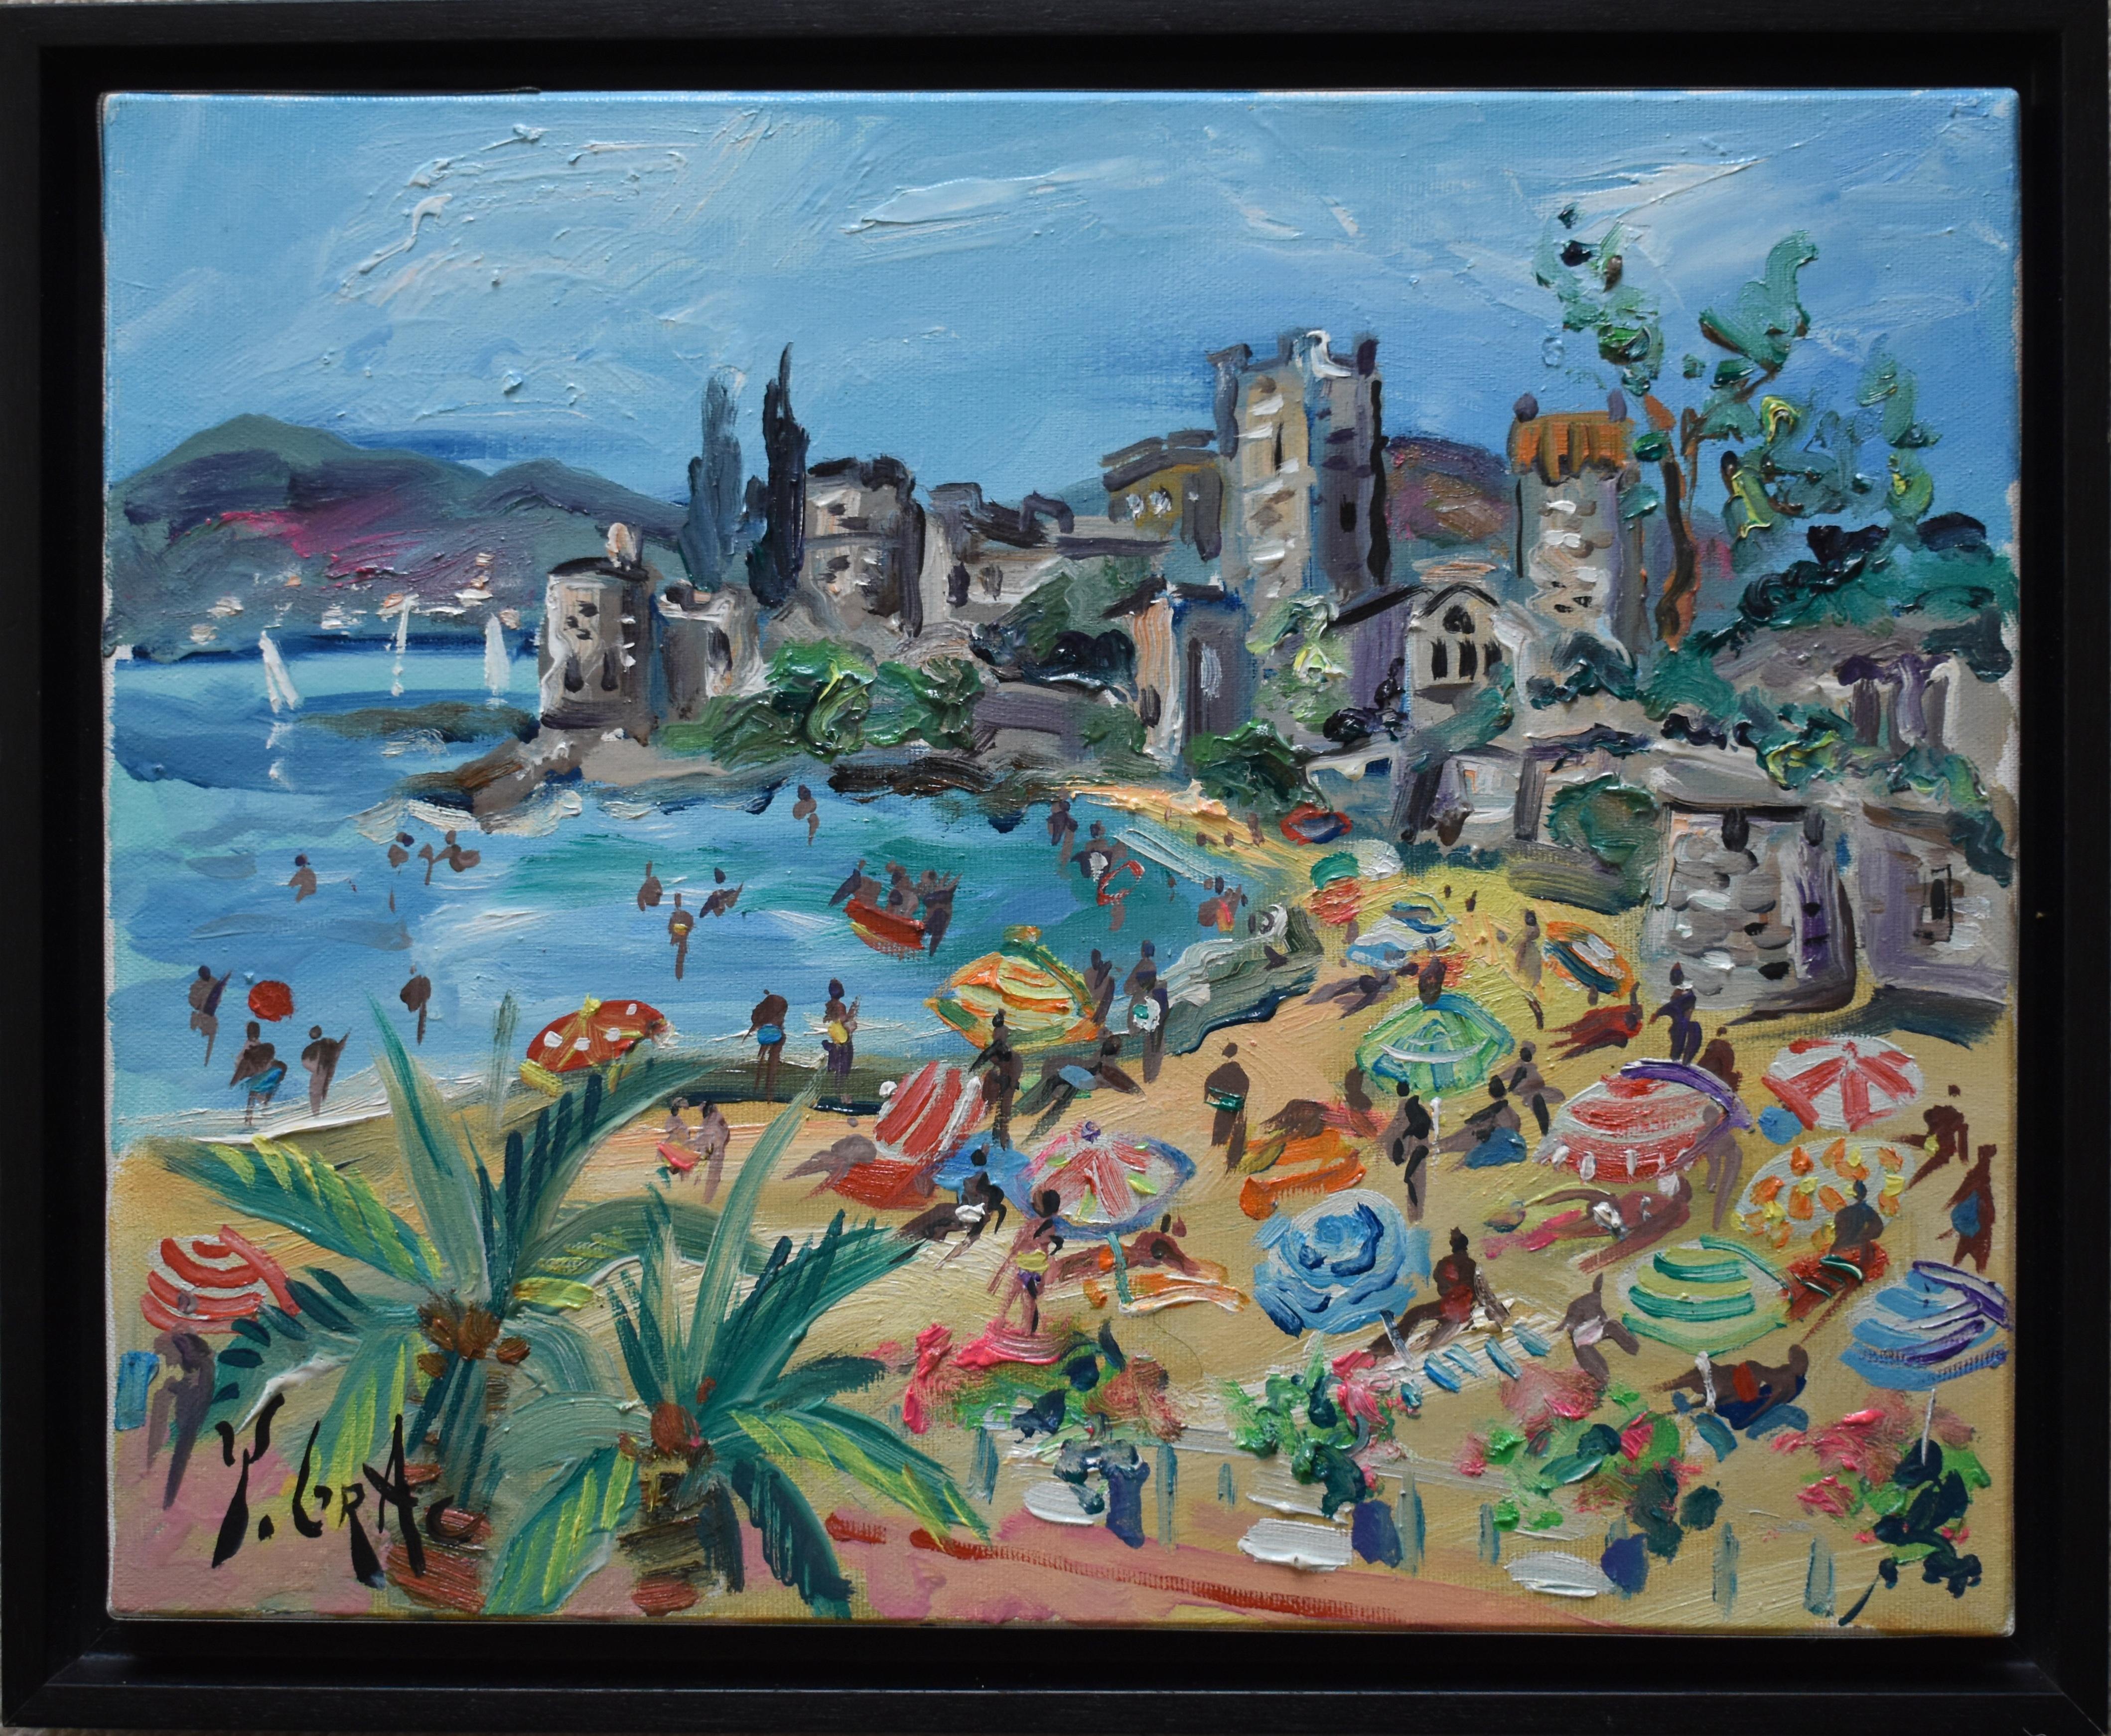 Baignade au Chateau de la Napoule

A vibrant beach scene in the south of France by the well regarded artist Yvon Grac. Christened by art critics the “Painter of the joy of life and happiness” this painting encapsulates the essence of Grac’s